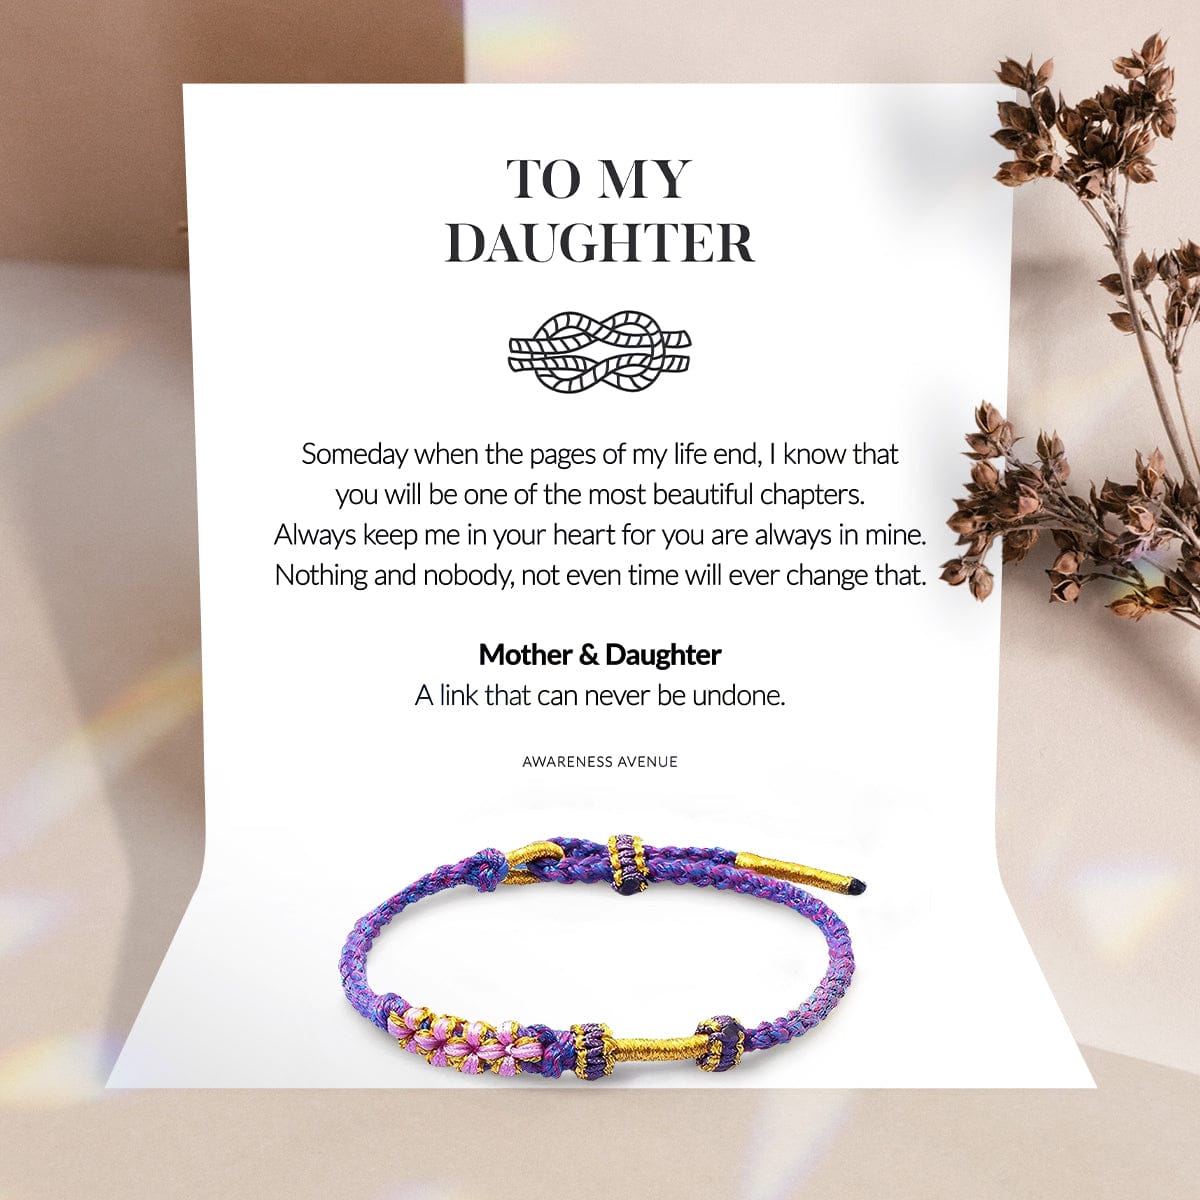 Daughter | A Link That Can Never Be Undone | Peach Blossom Knot Bracelet